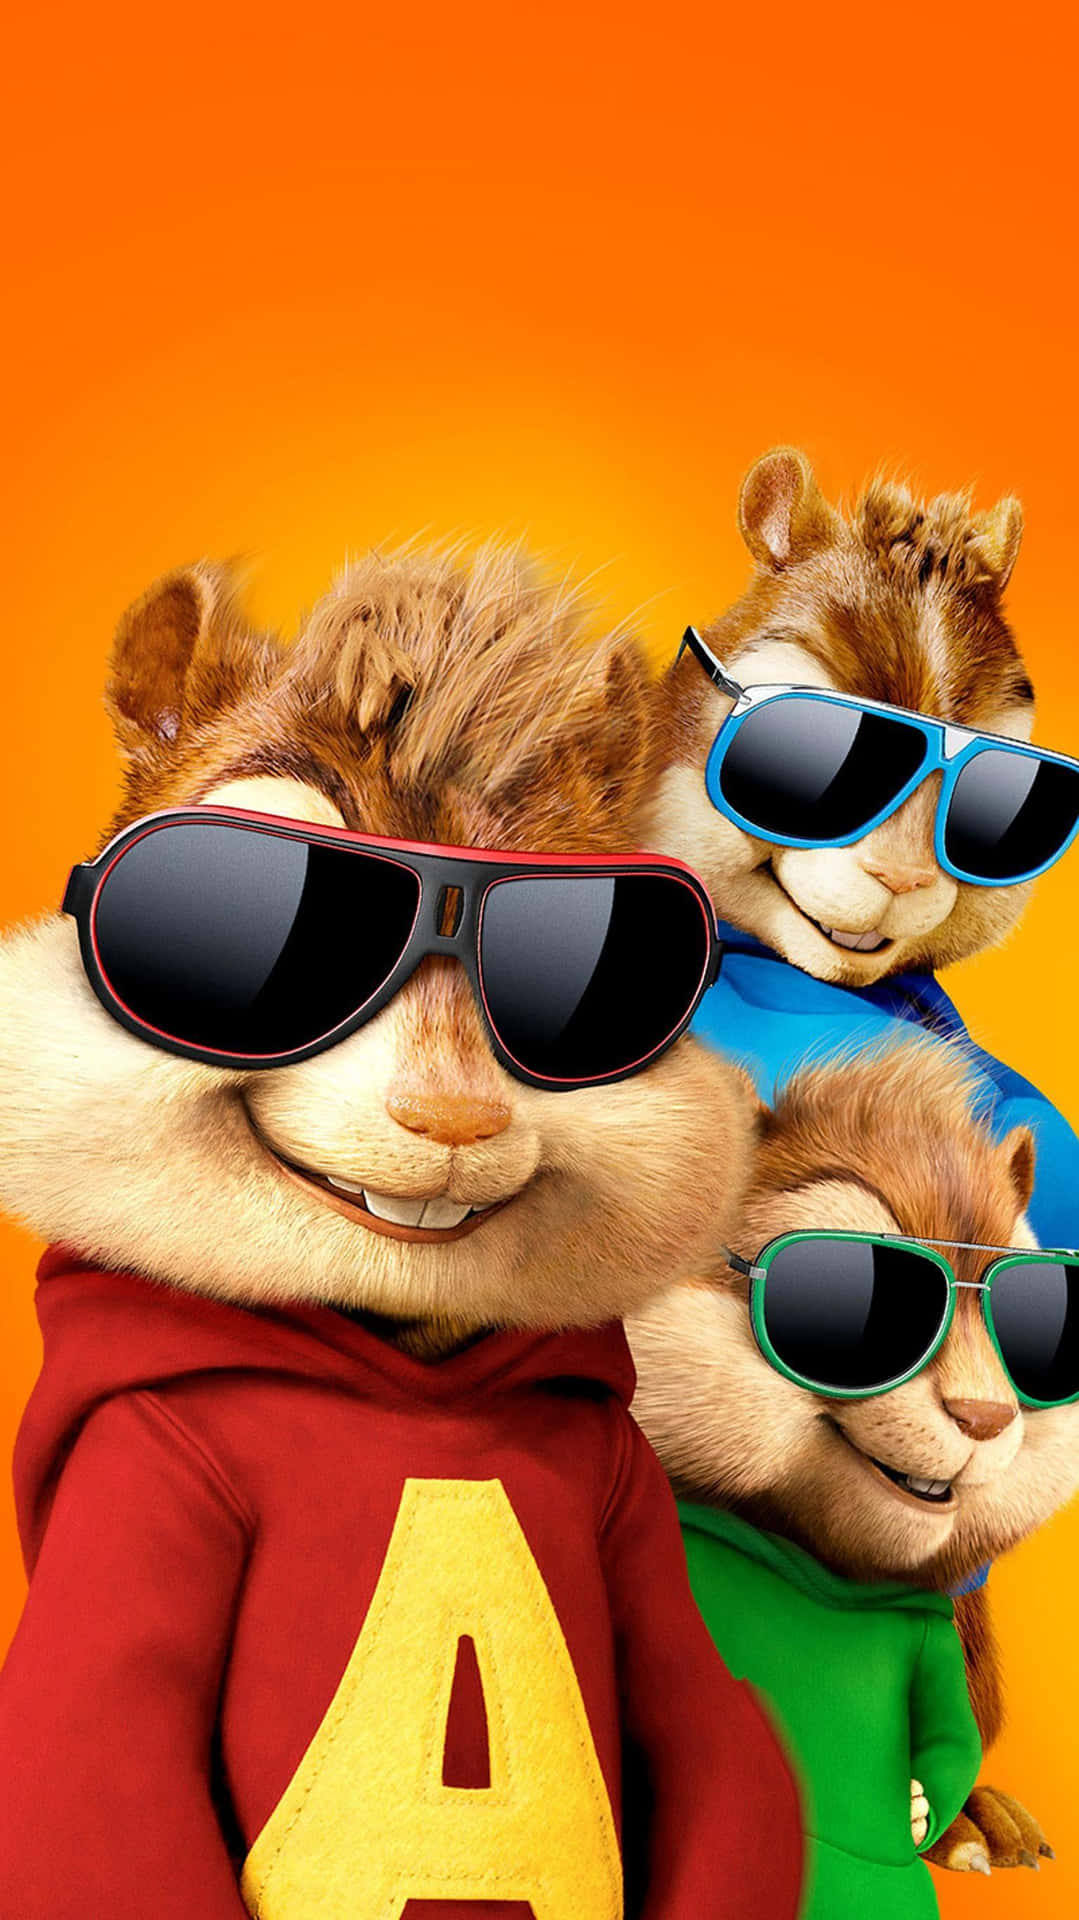 "Alvin And The Chipmunks"